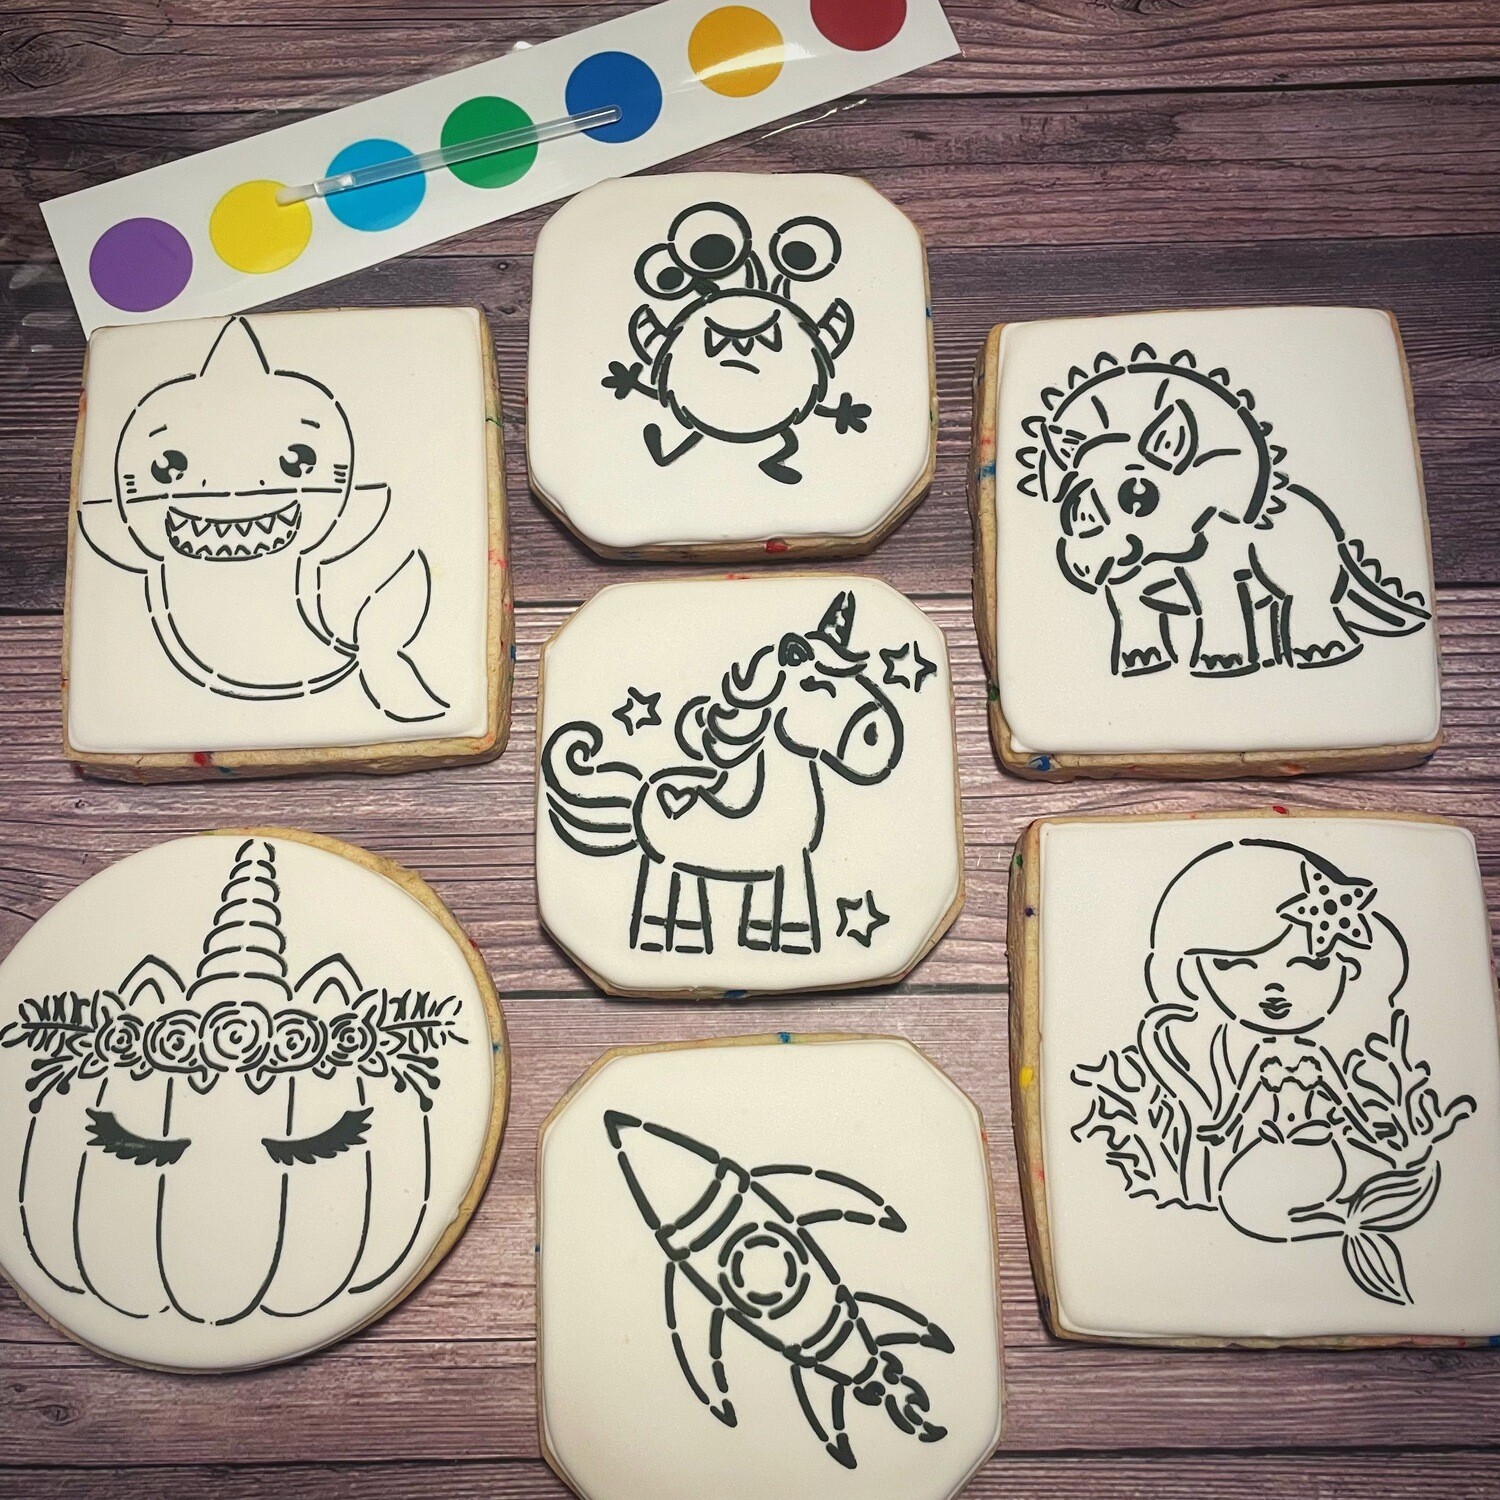 PAINT YOUR OWN COOKIES (4 COOKIES)